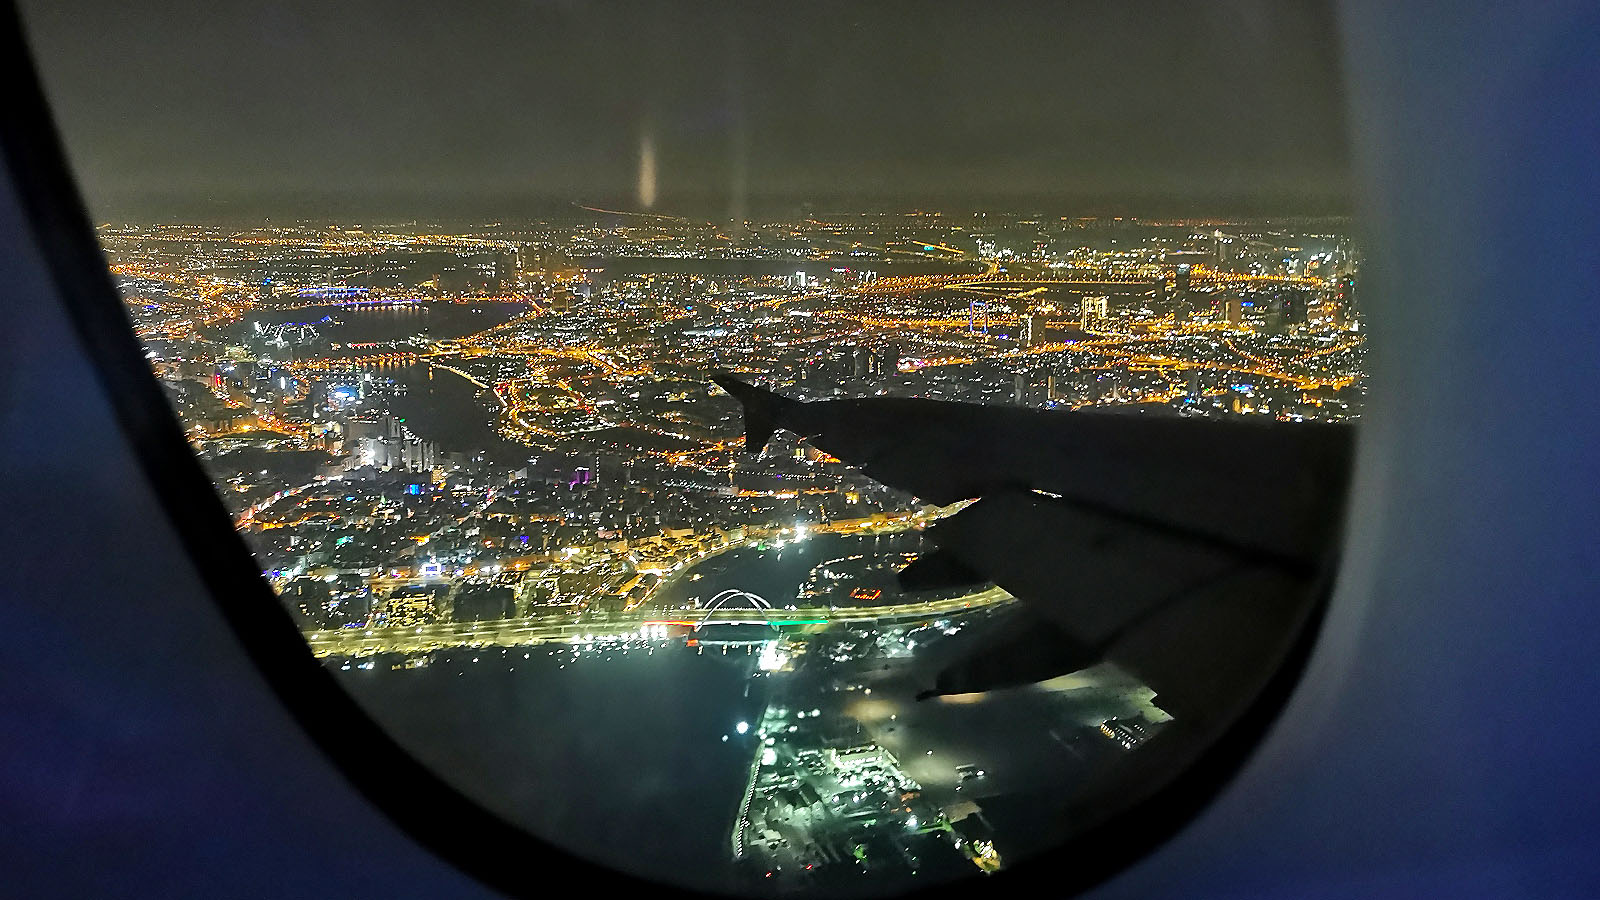 Dubai at night, seen from Emirates Airbus A380 Business Class